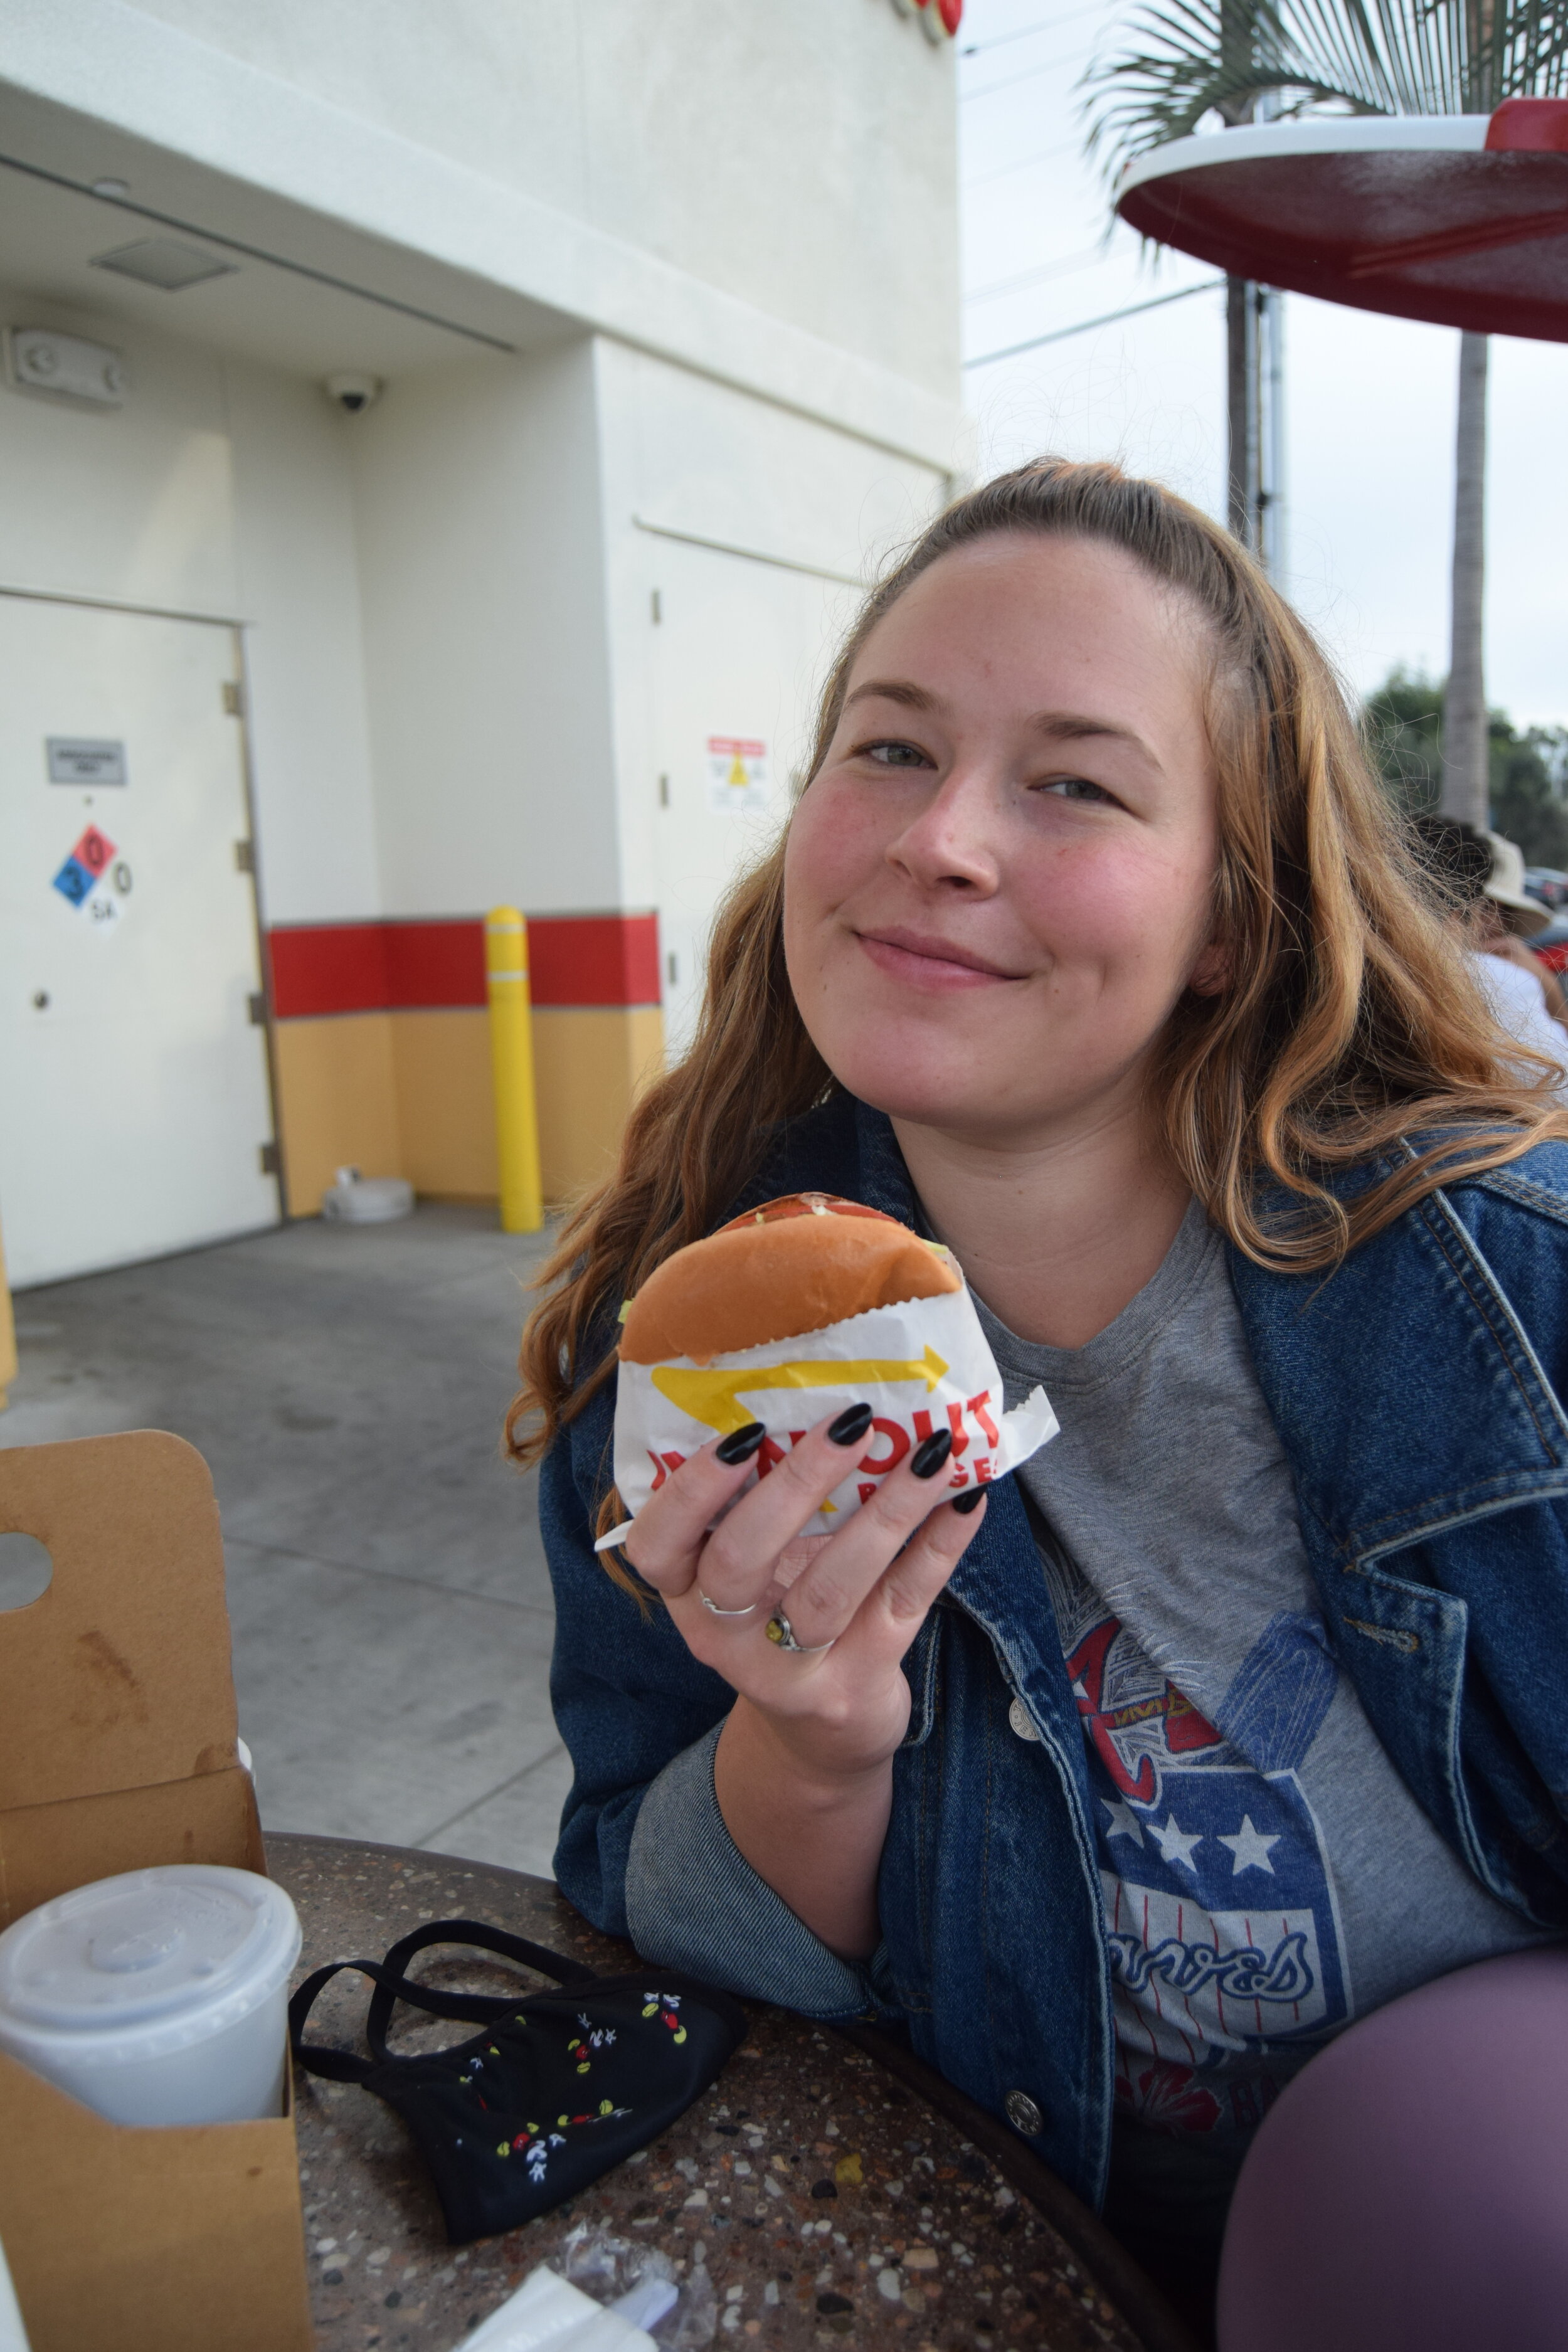 Me and In-N-Out